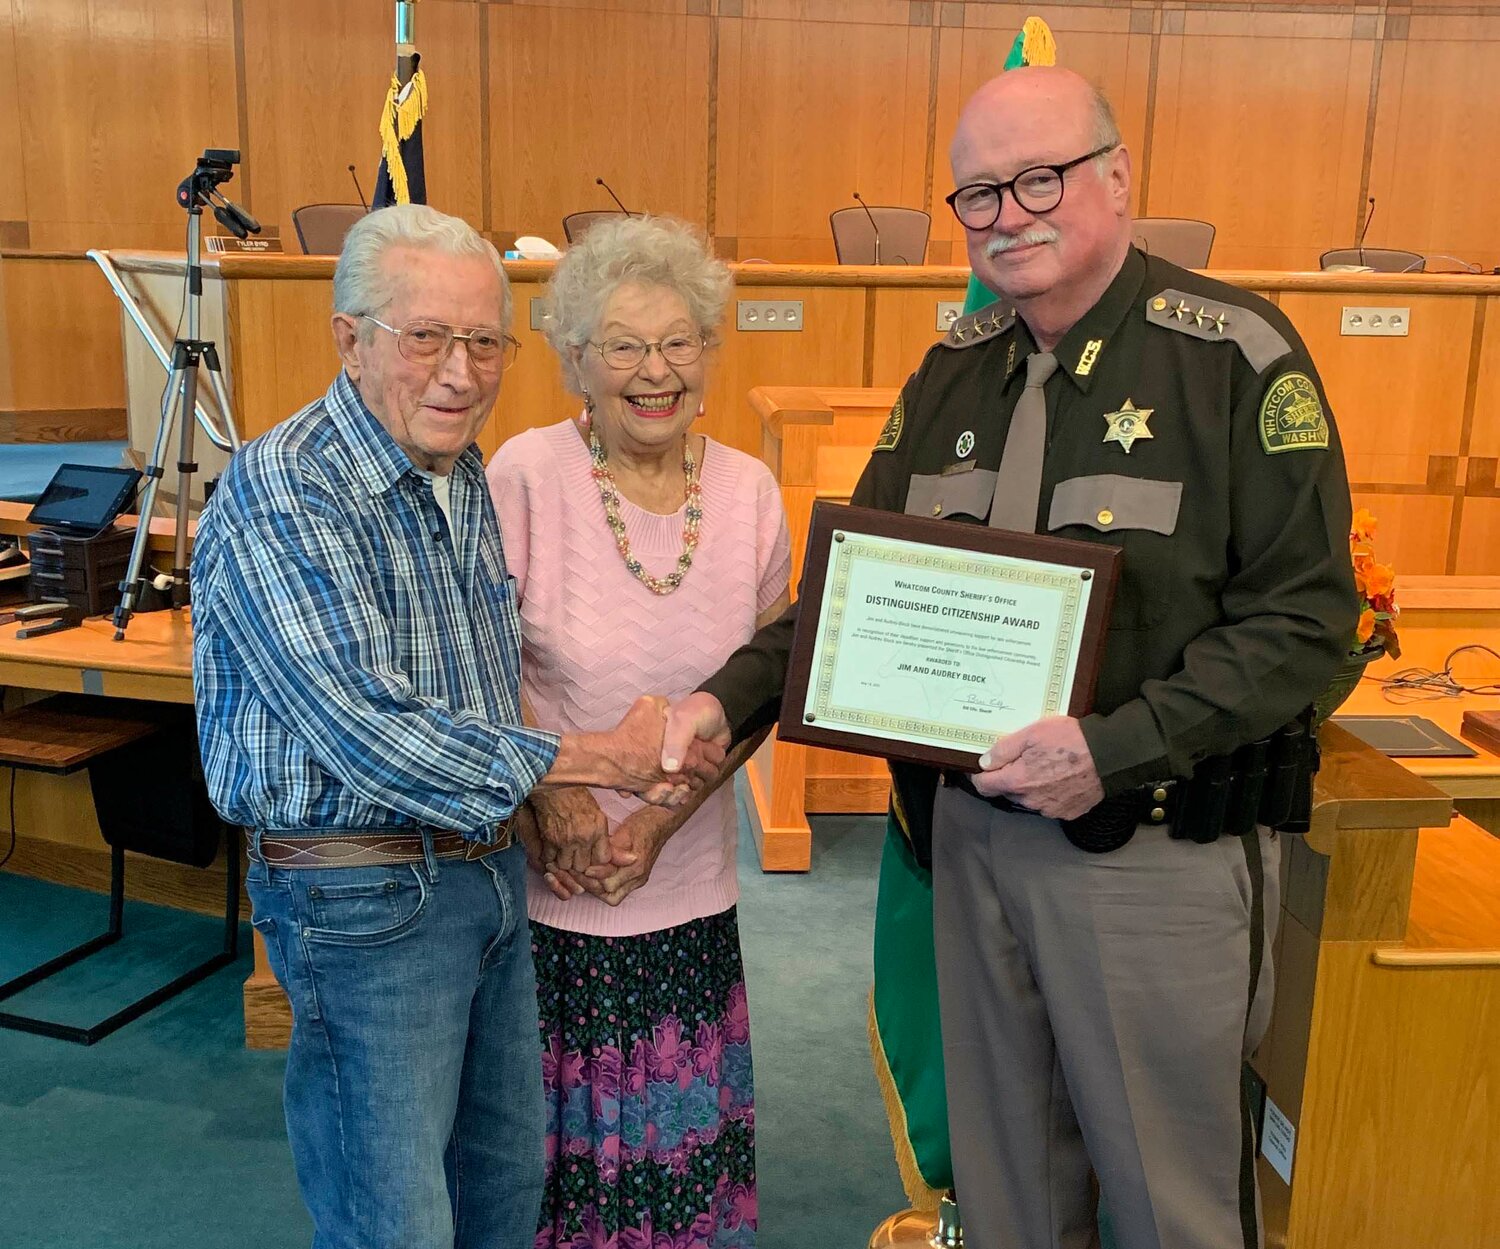 From l.; East Blaine residents Jim Block, 93, and Audry Block, 87, were presented the Whatcom County Sheriff’s Office Distinguished Citizenship Award from sheriff Bill Elfo on May 18. The couple were honored for their support of local law enforcement, which has included bringing out treats, checking on deputies and inviting deputies into their home for meals and holiday gatherings. WCSO hosted an awards ceremony with several honors in celebration of National Police Week.